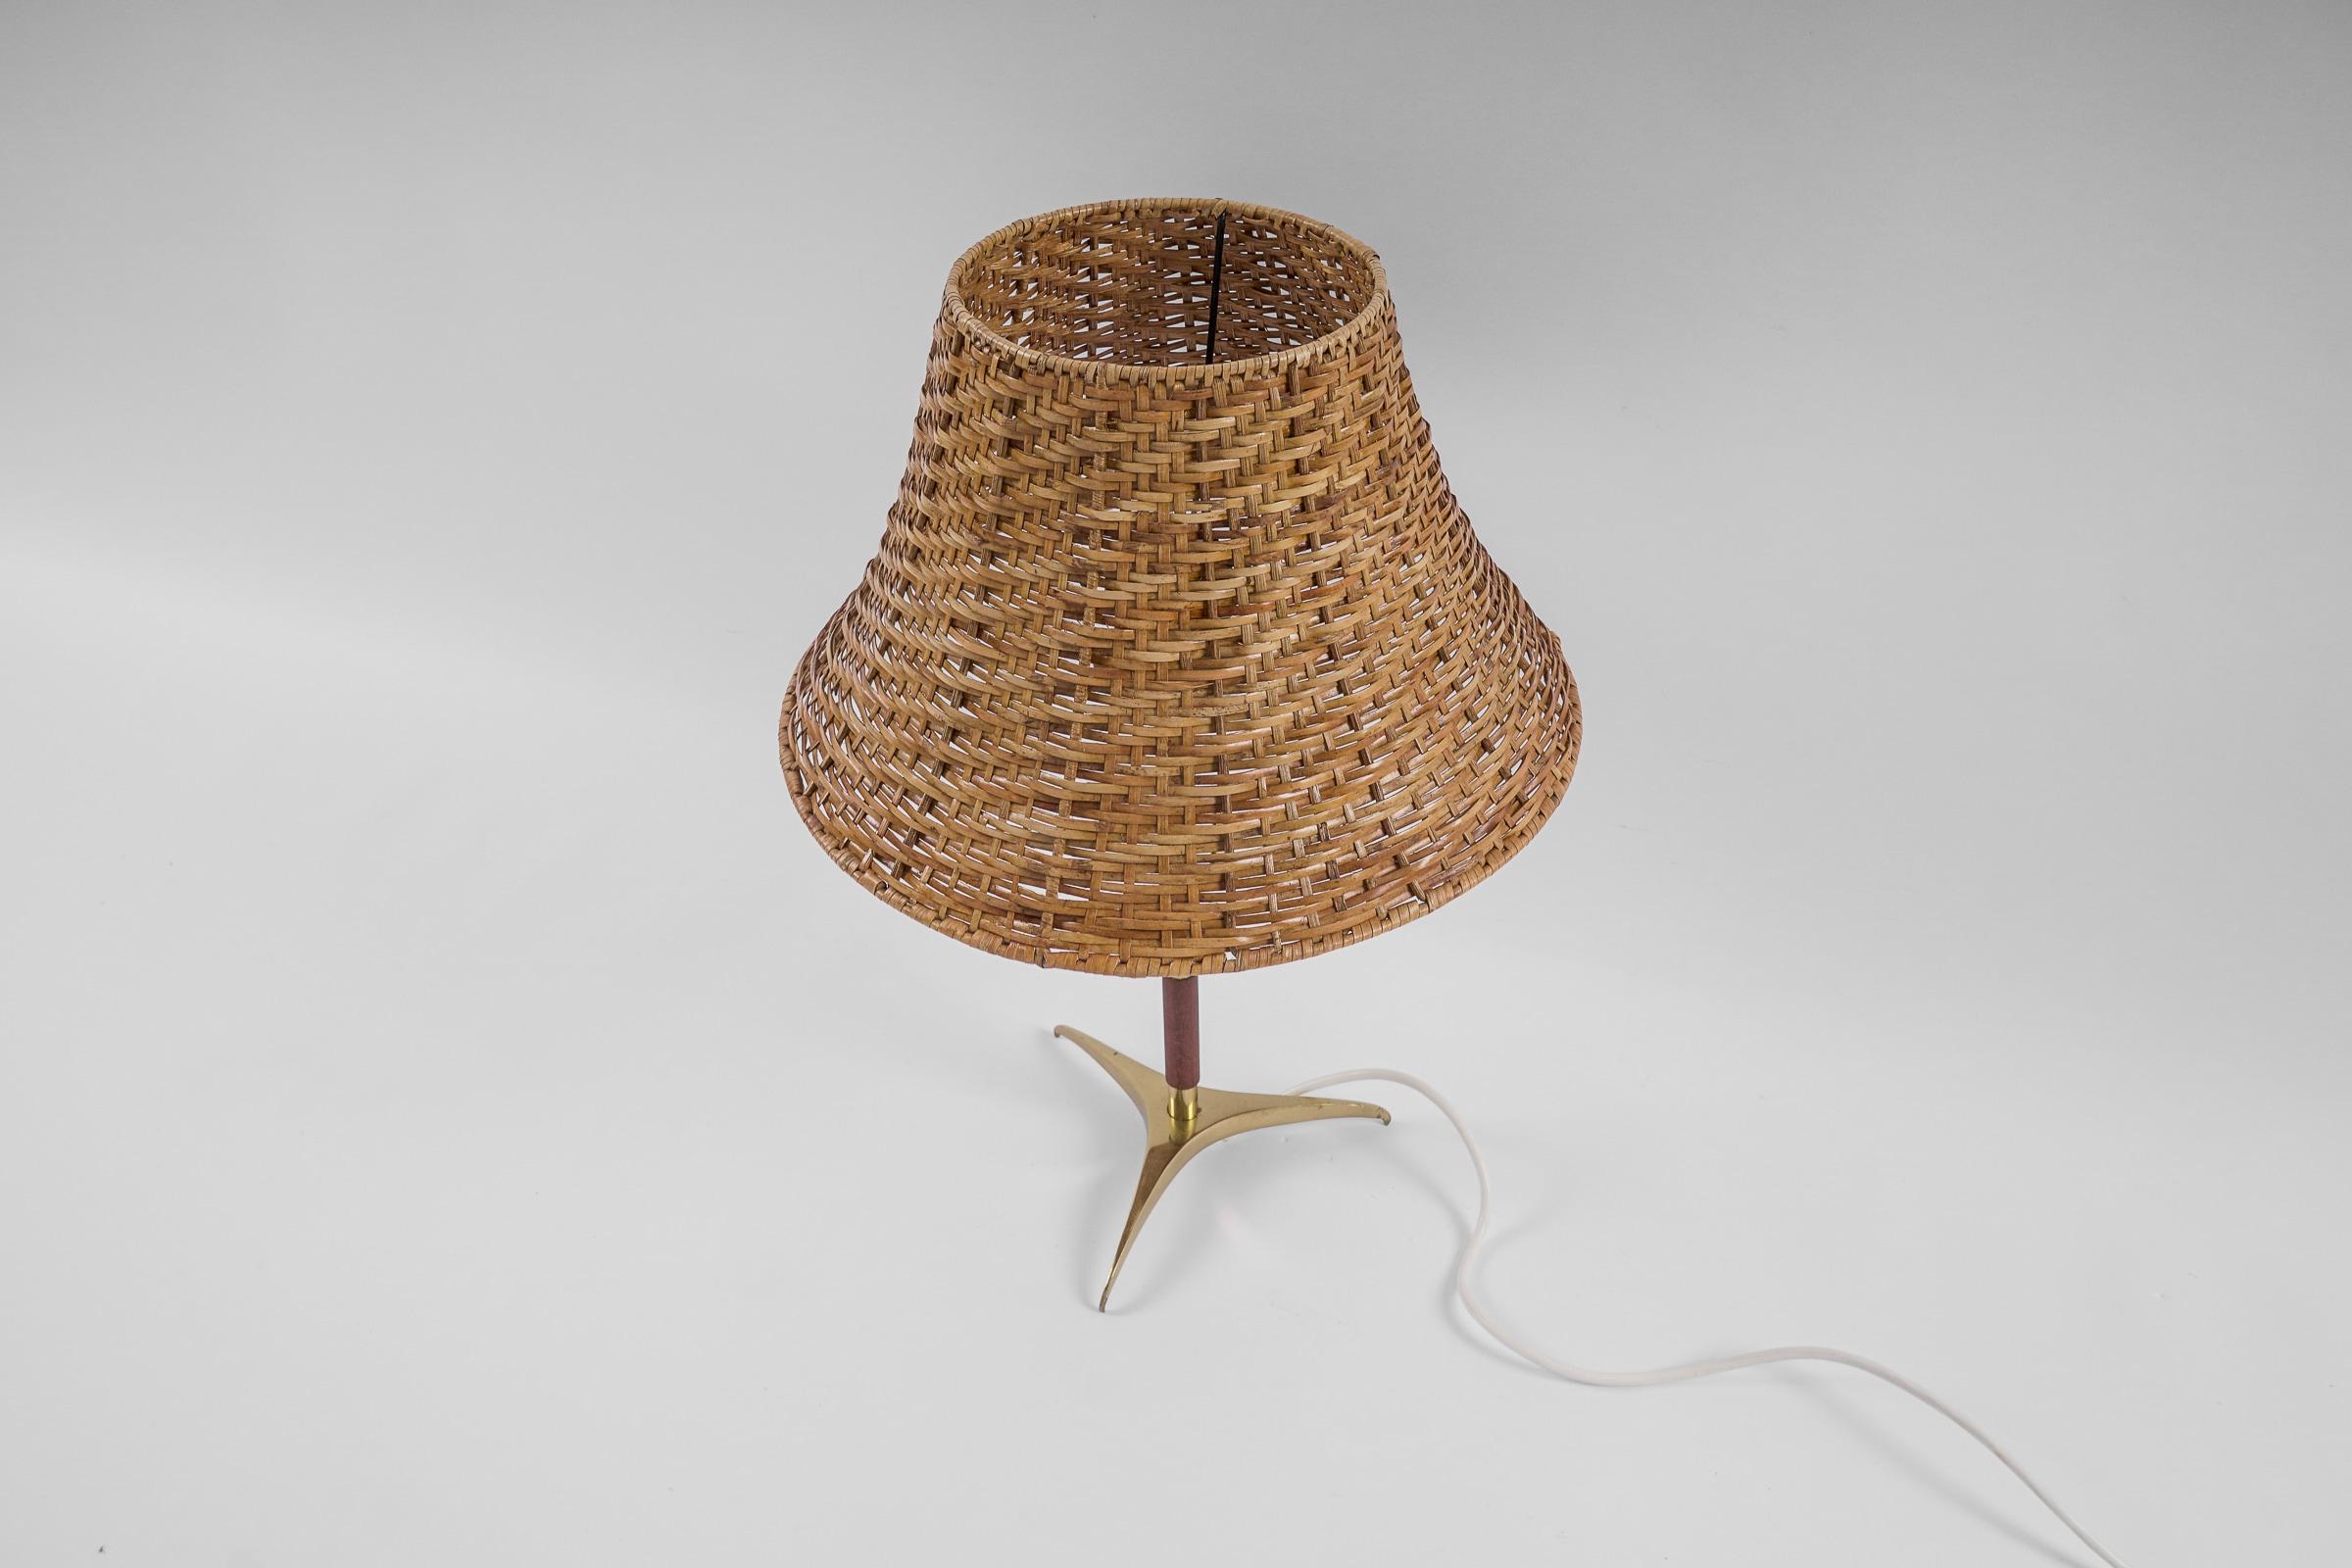 Lovely Mid-Century Modern Table Lamp in Brass, Wicker and Teak, 1950s, Austria For Sale 8